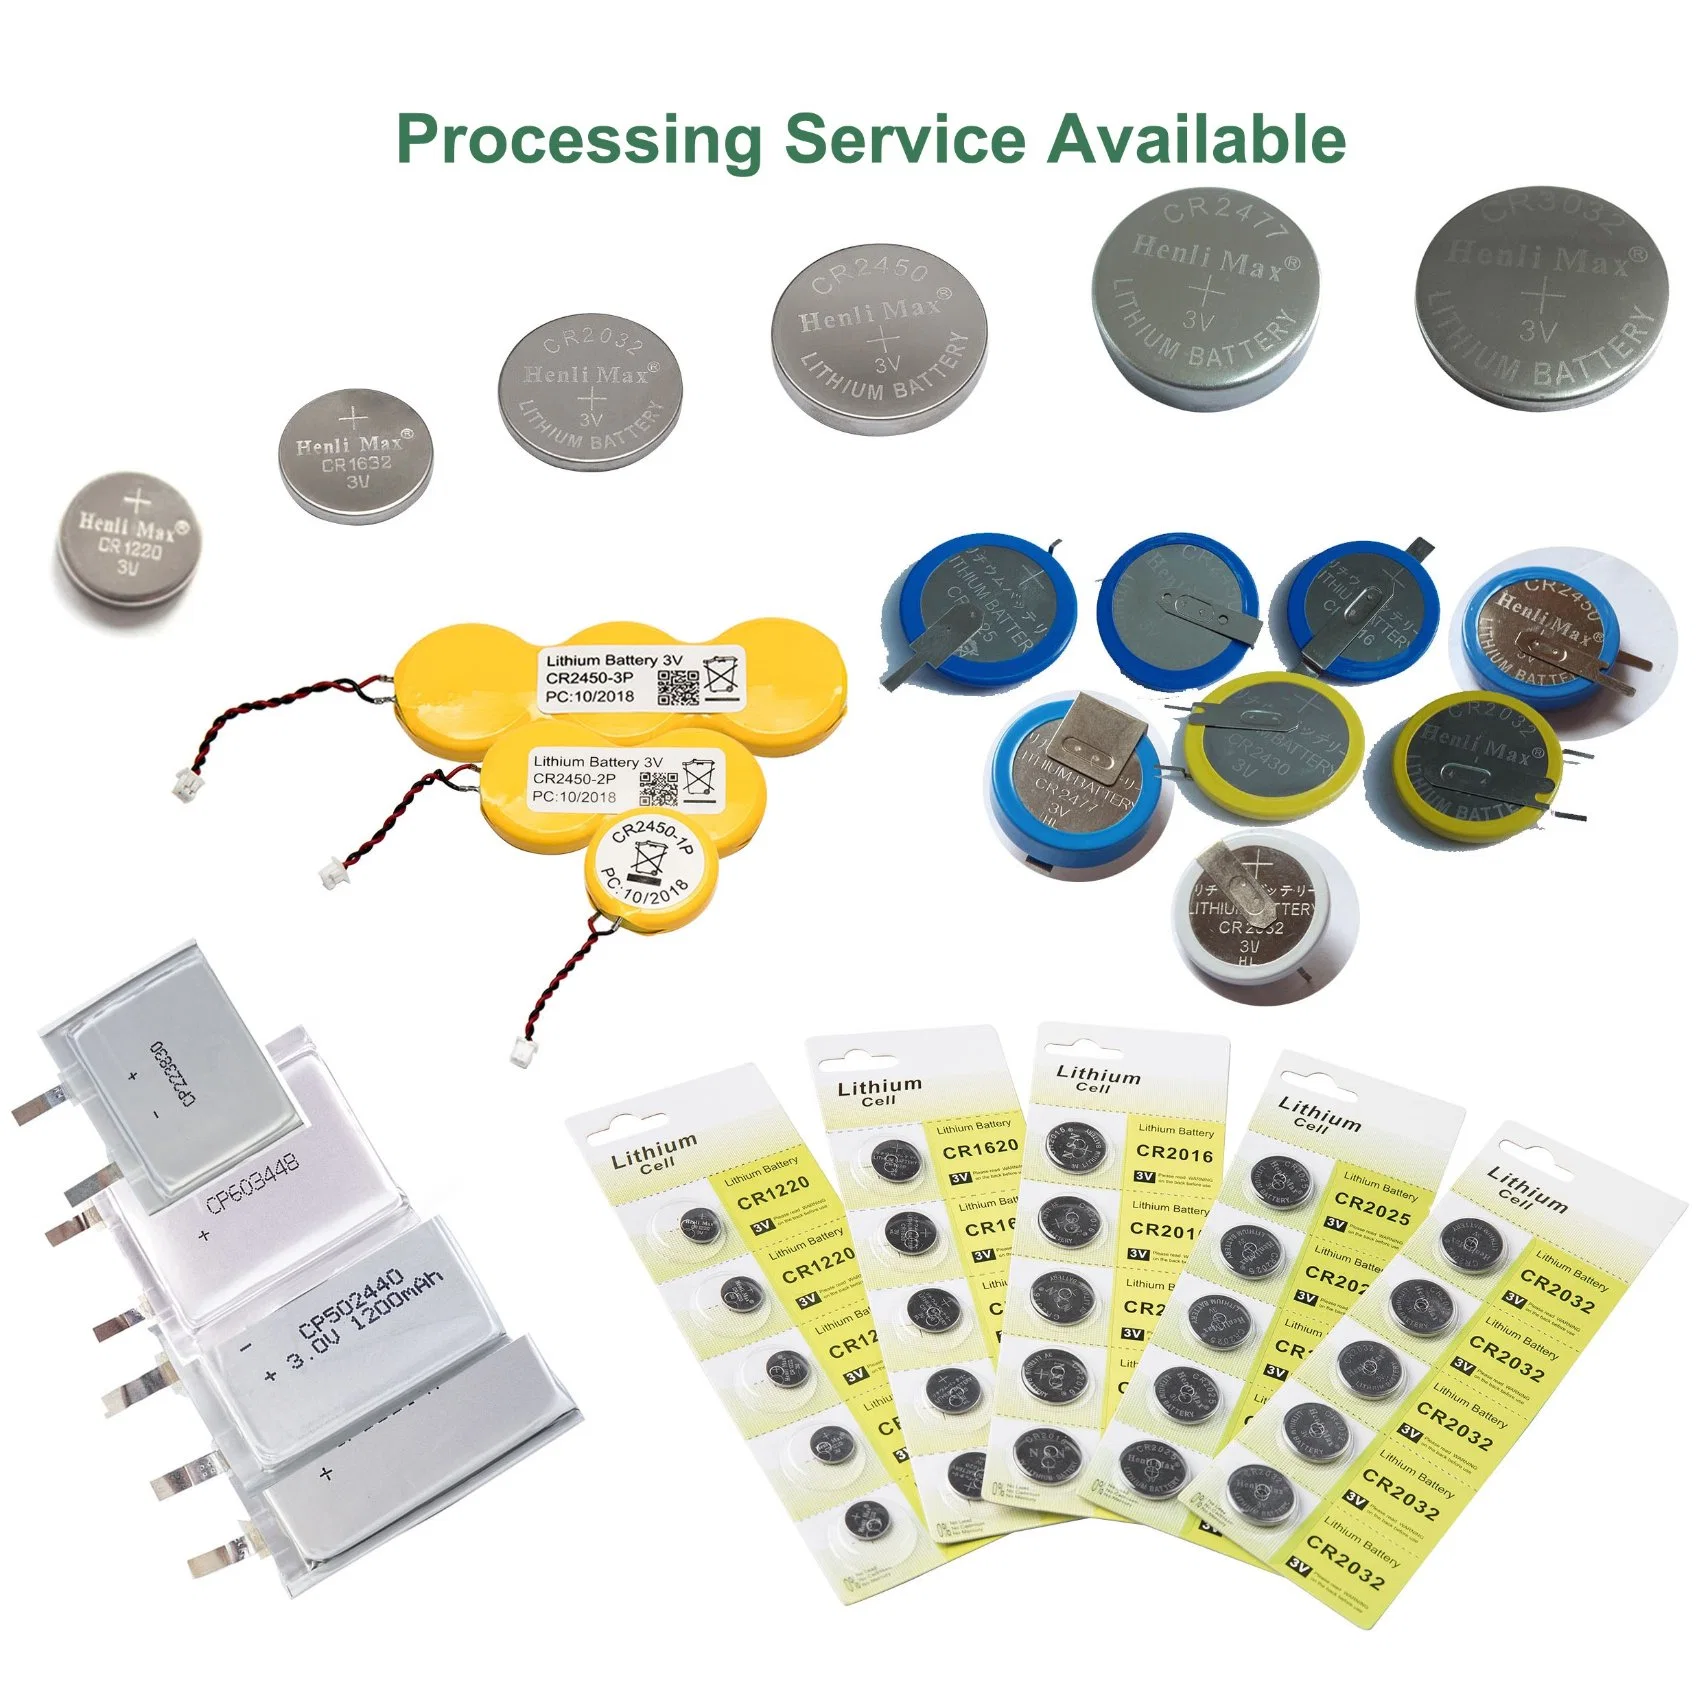 Cr2032 Primary 3V Lithium Button Cell Coin Battery for Remote Control, Scales, Calculator, Watch, Medical Instruments, Computer Motherboard.